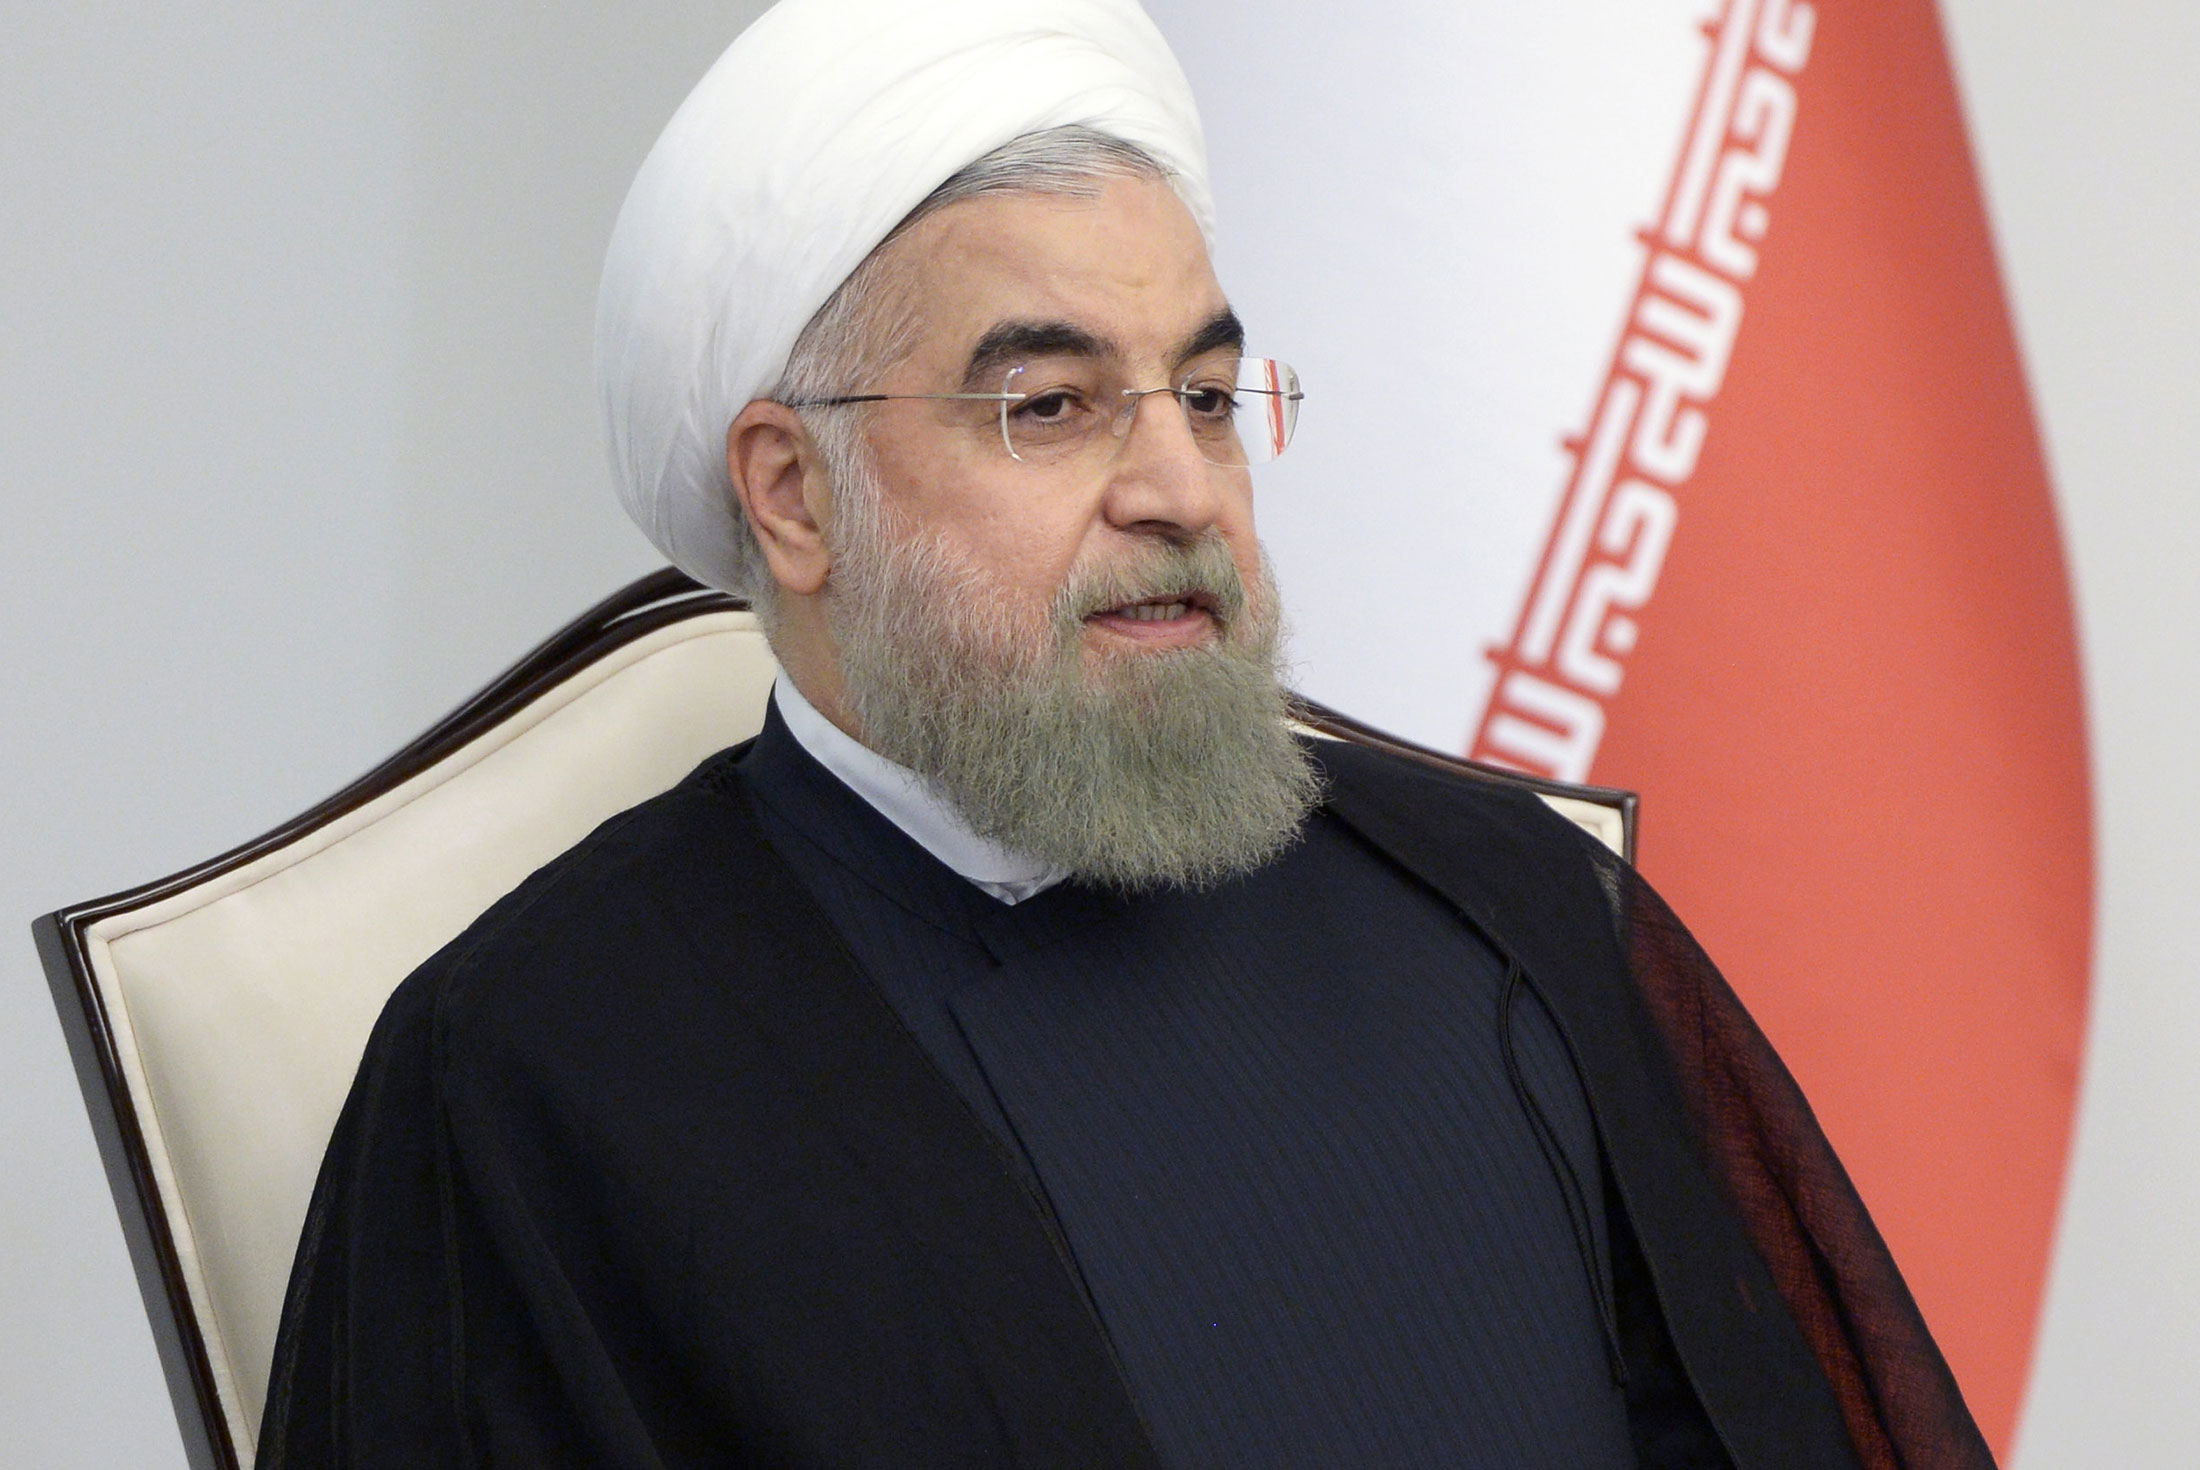 Iran supports any move to stabilize oil market: Rouhani